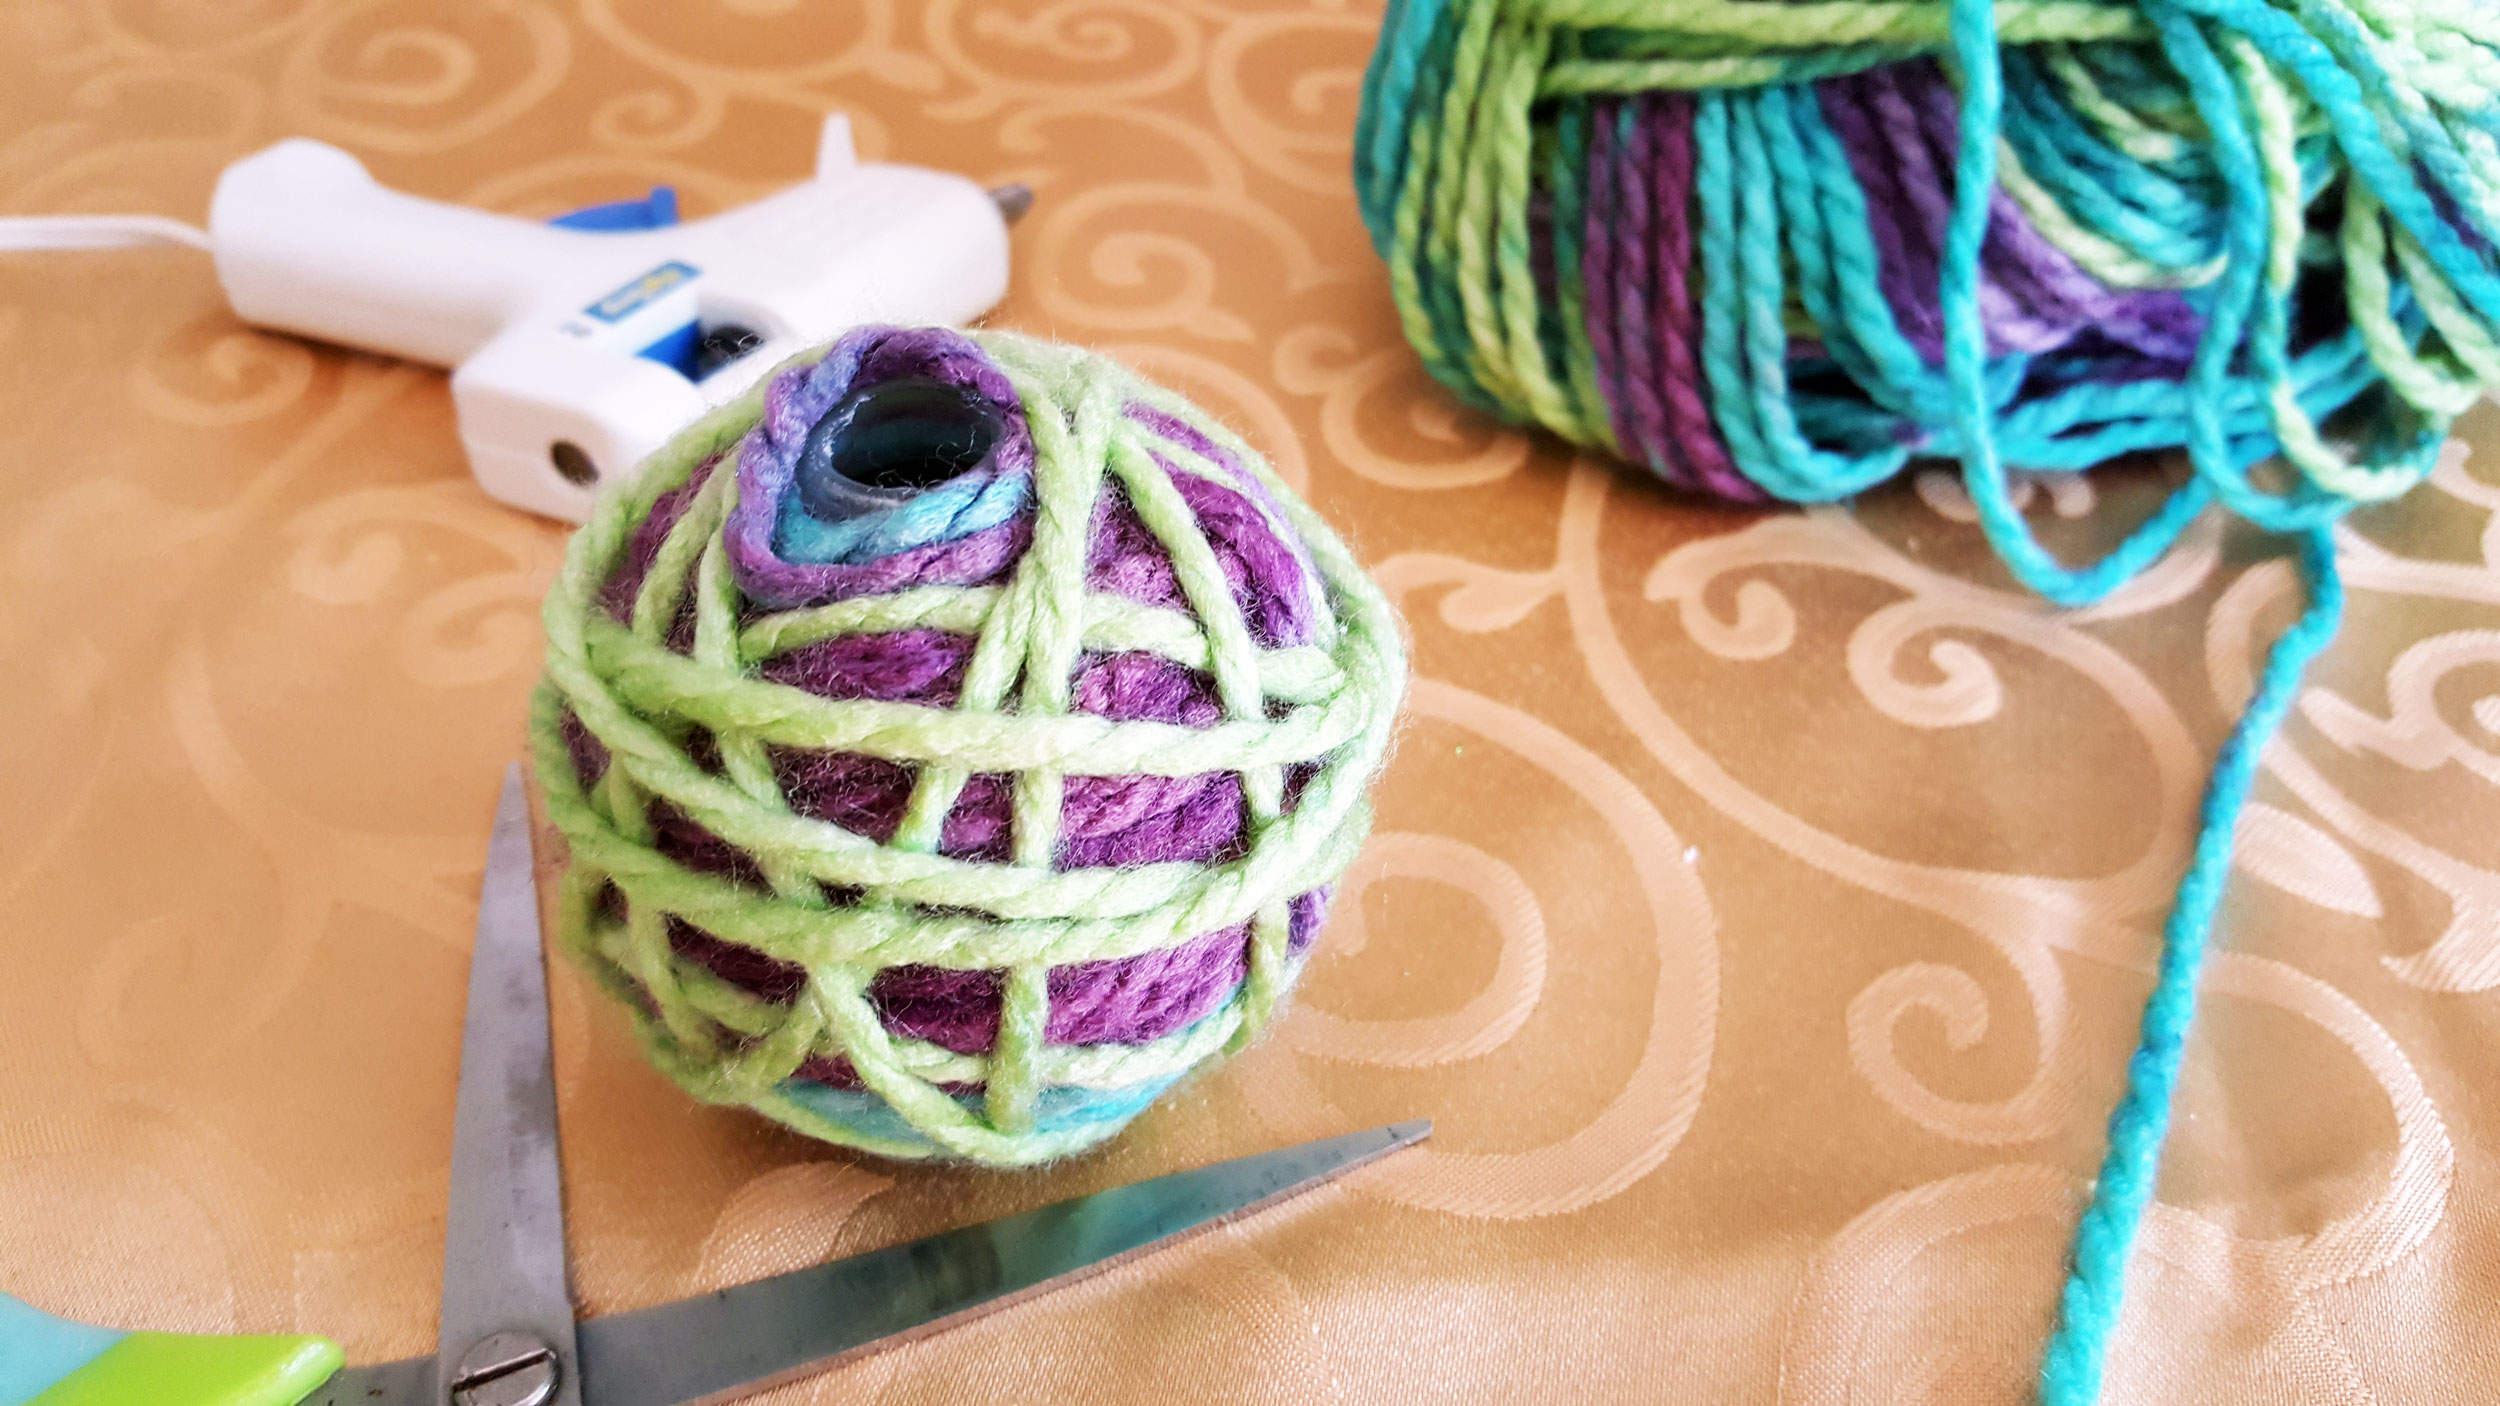 Step 4 is to use a second color yarn and wrap the ornament the ornament more sparingly in a different direction. | OrnamentShop.com